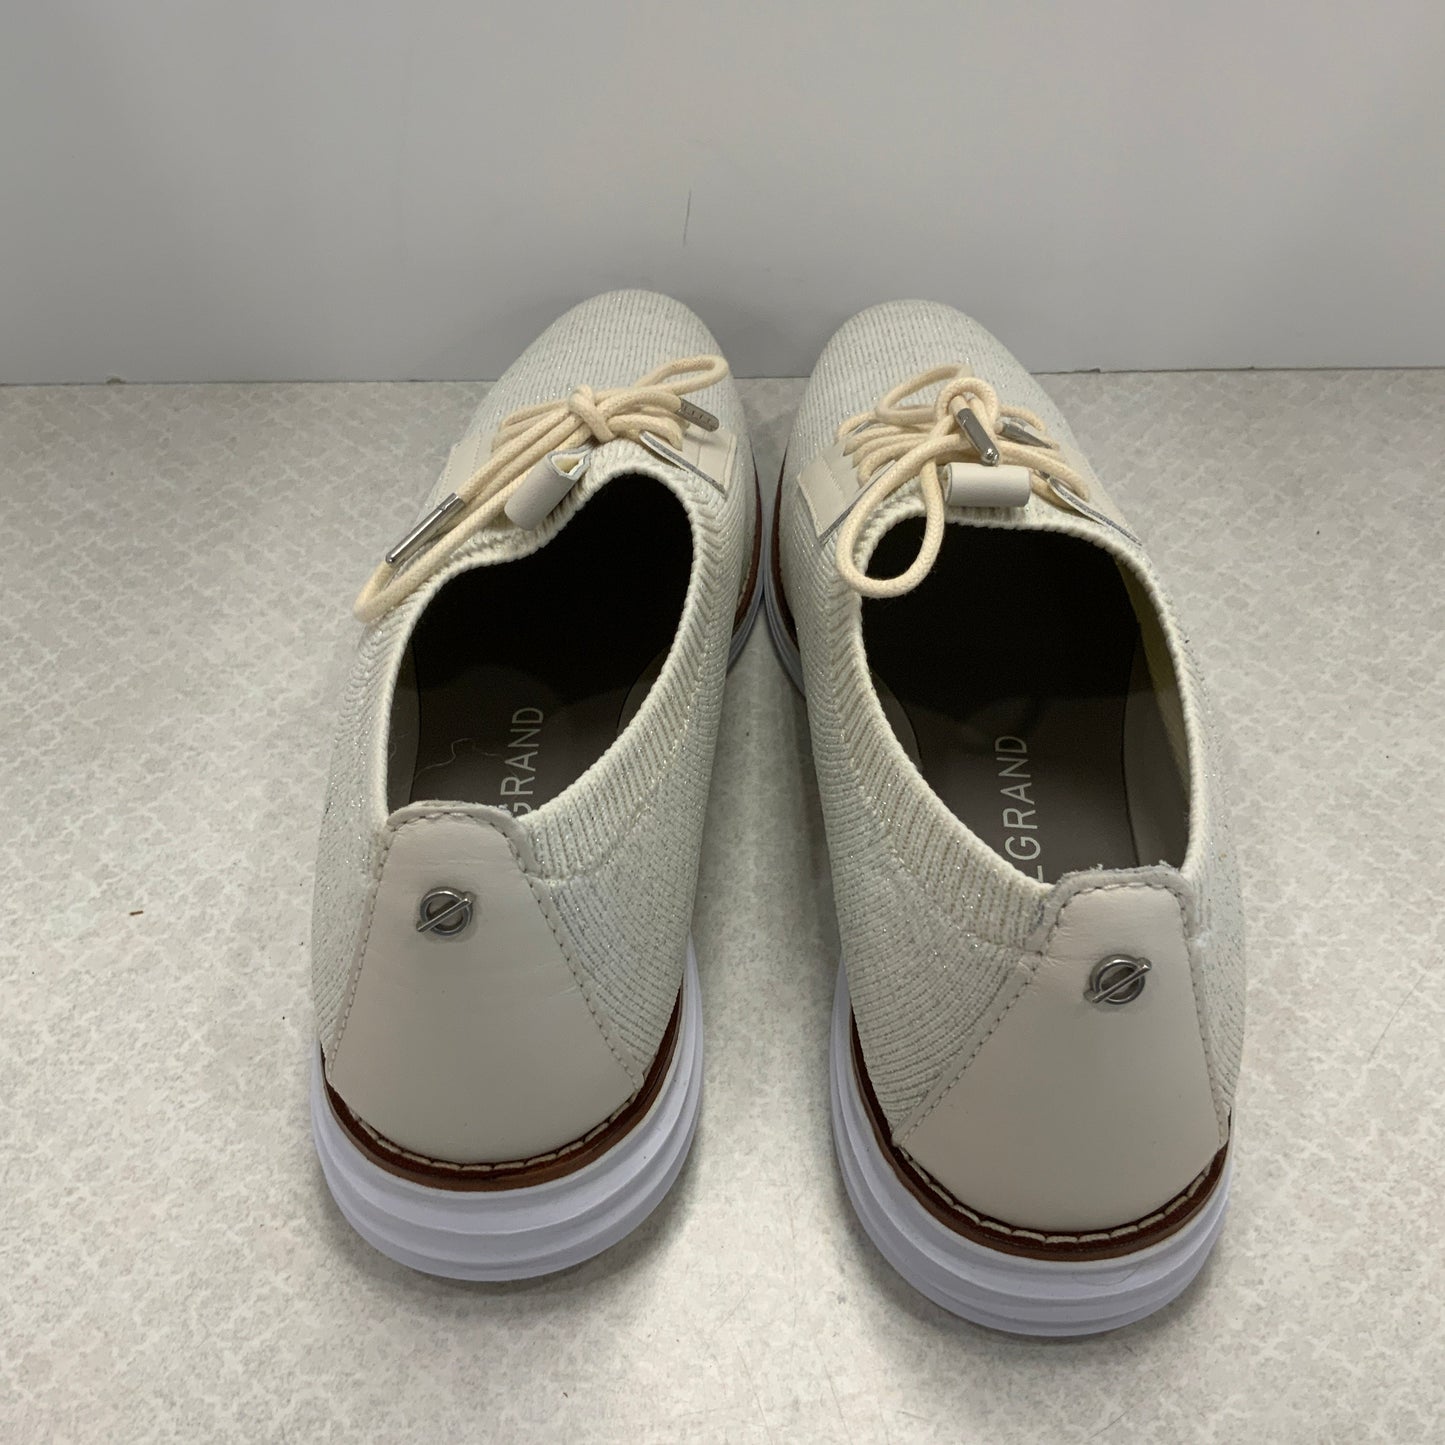 Cream Shoes Flats Cole-haan, Size 9.5